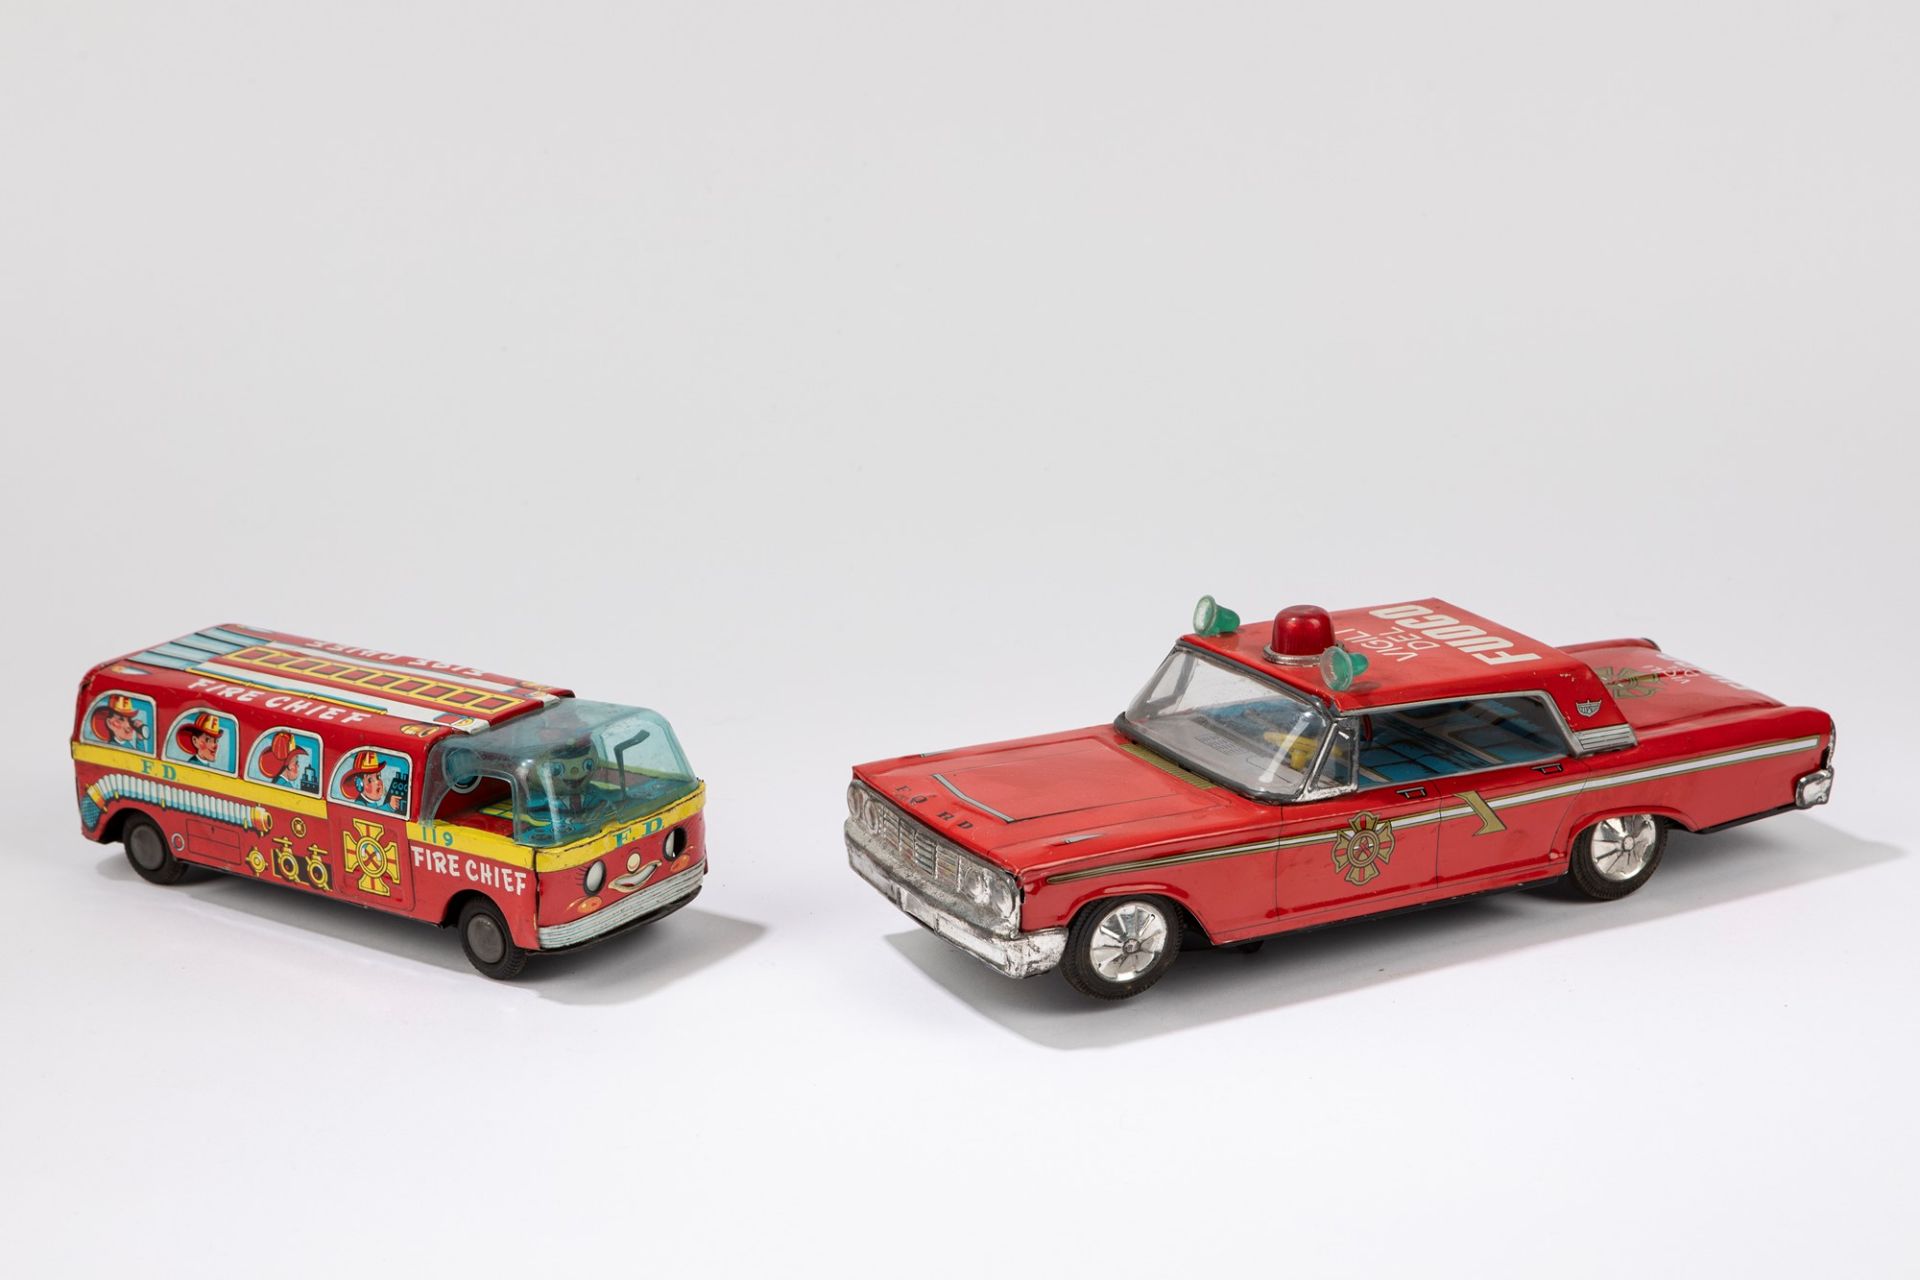 Two fire brigade vehicles, 1960-1970